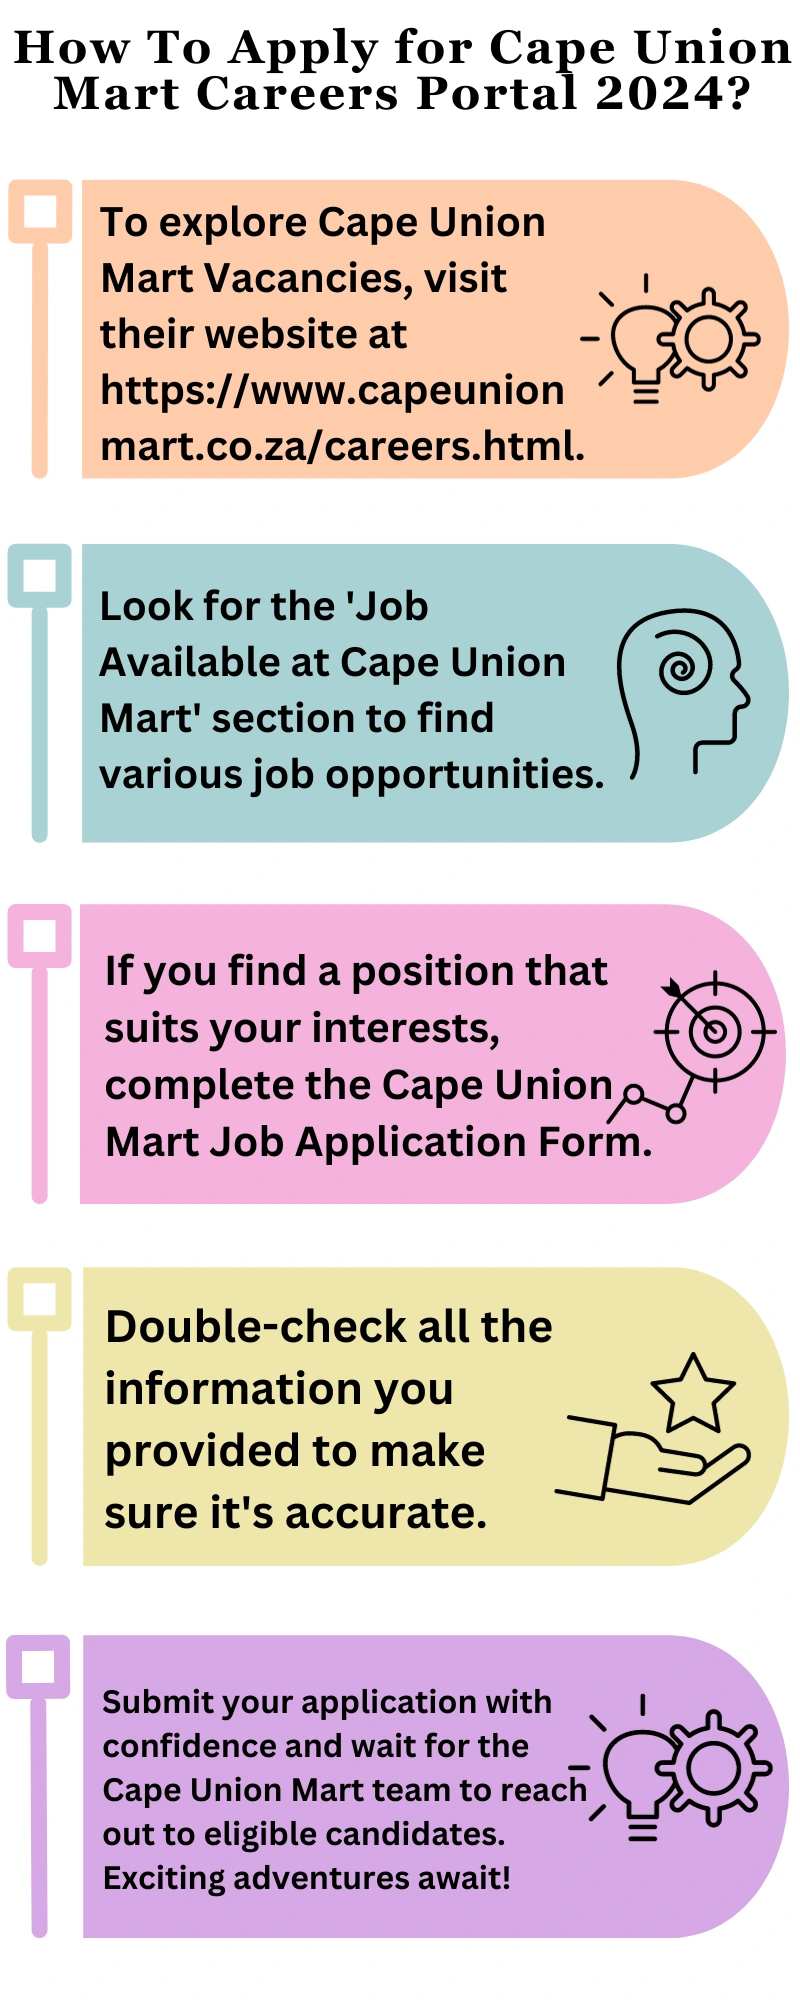 How To Apply for Cape Union Mart Careers Portal 2024?